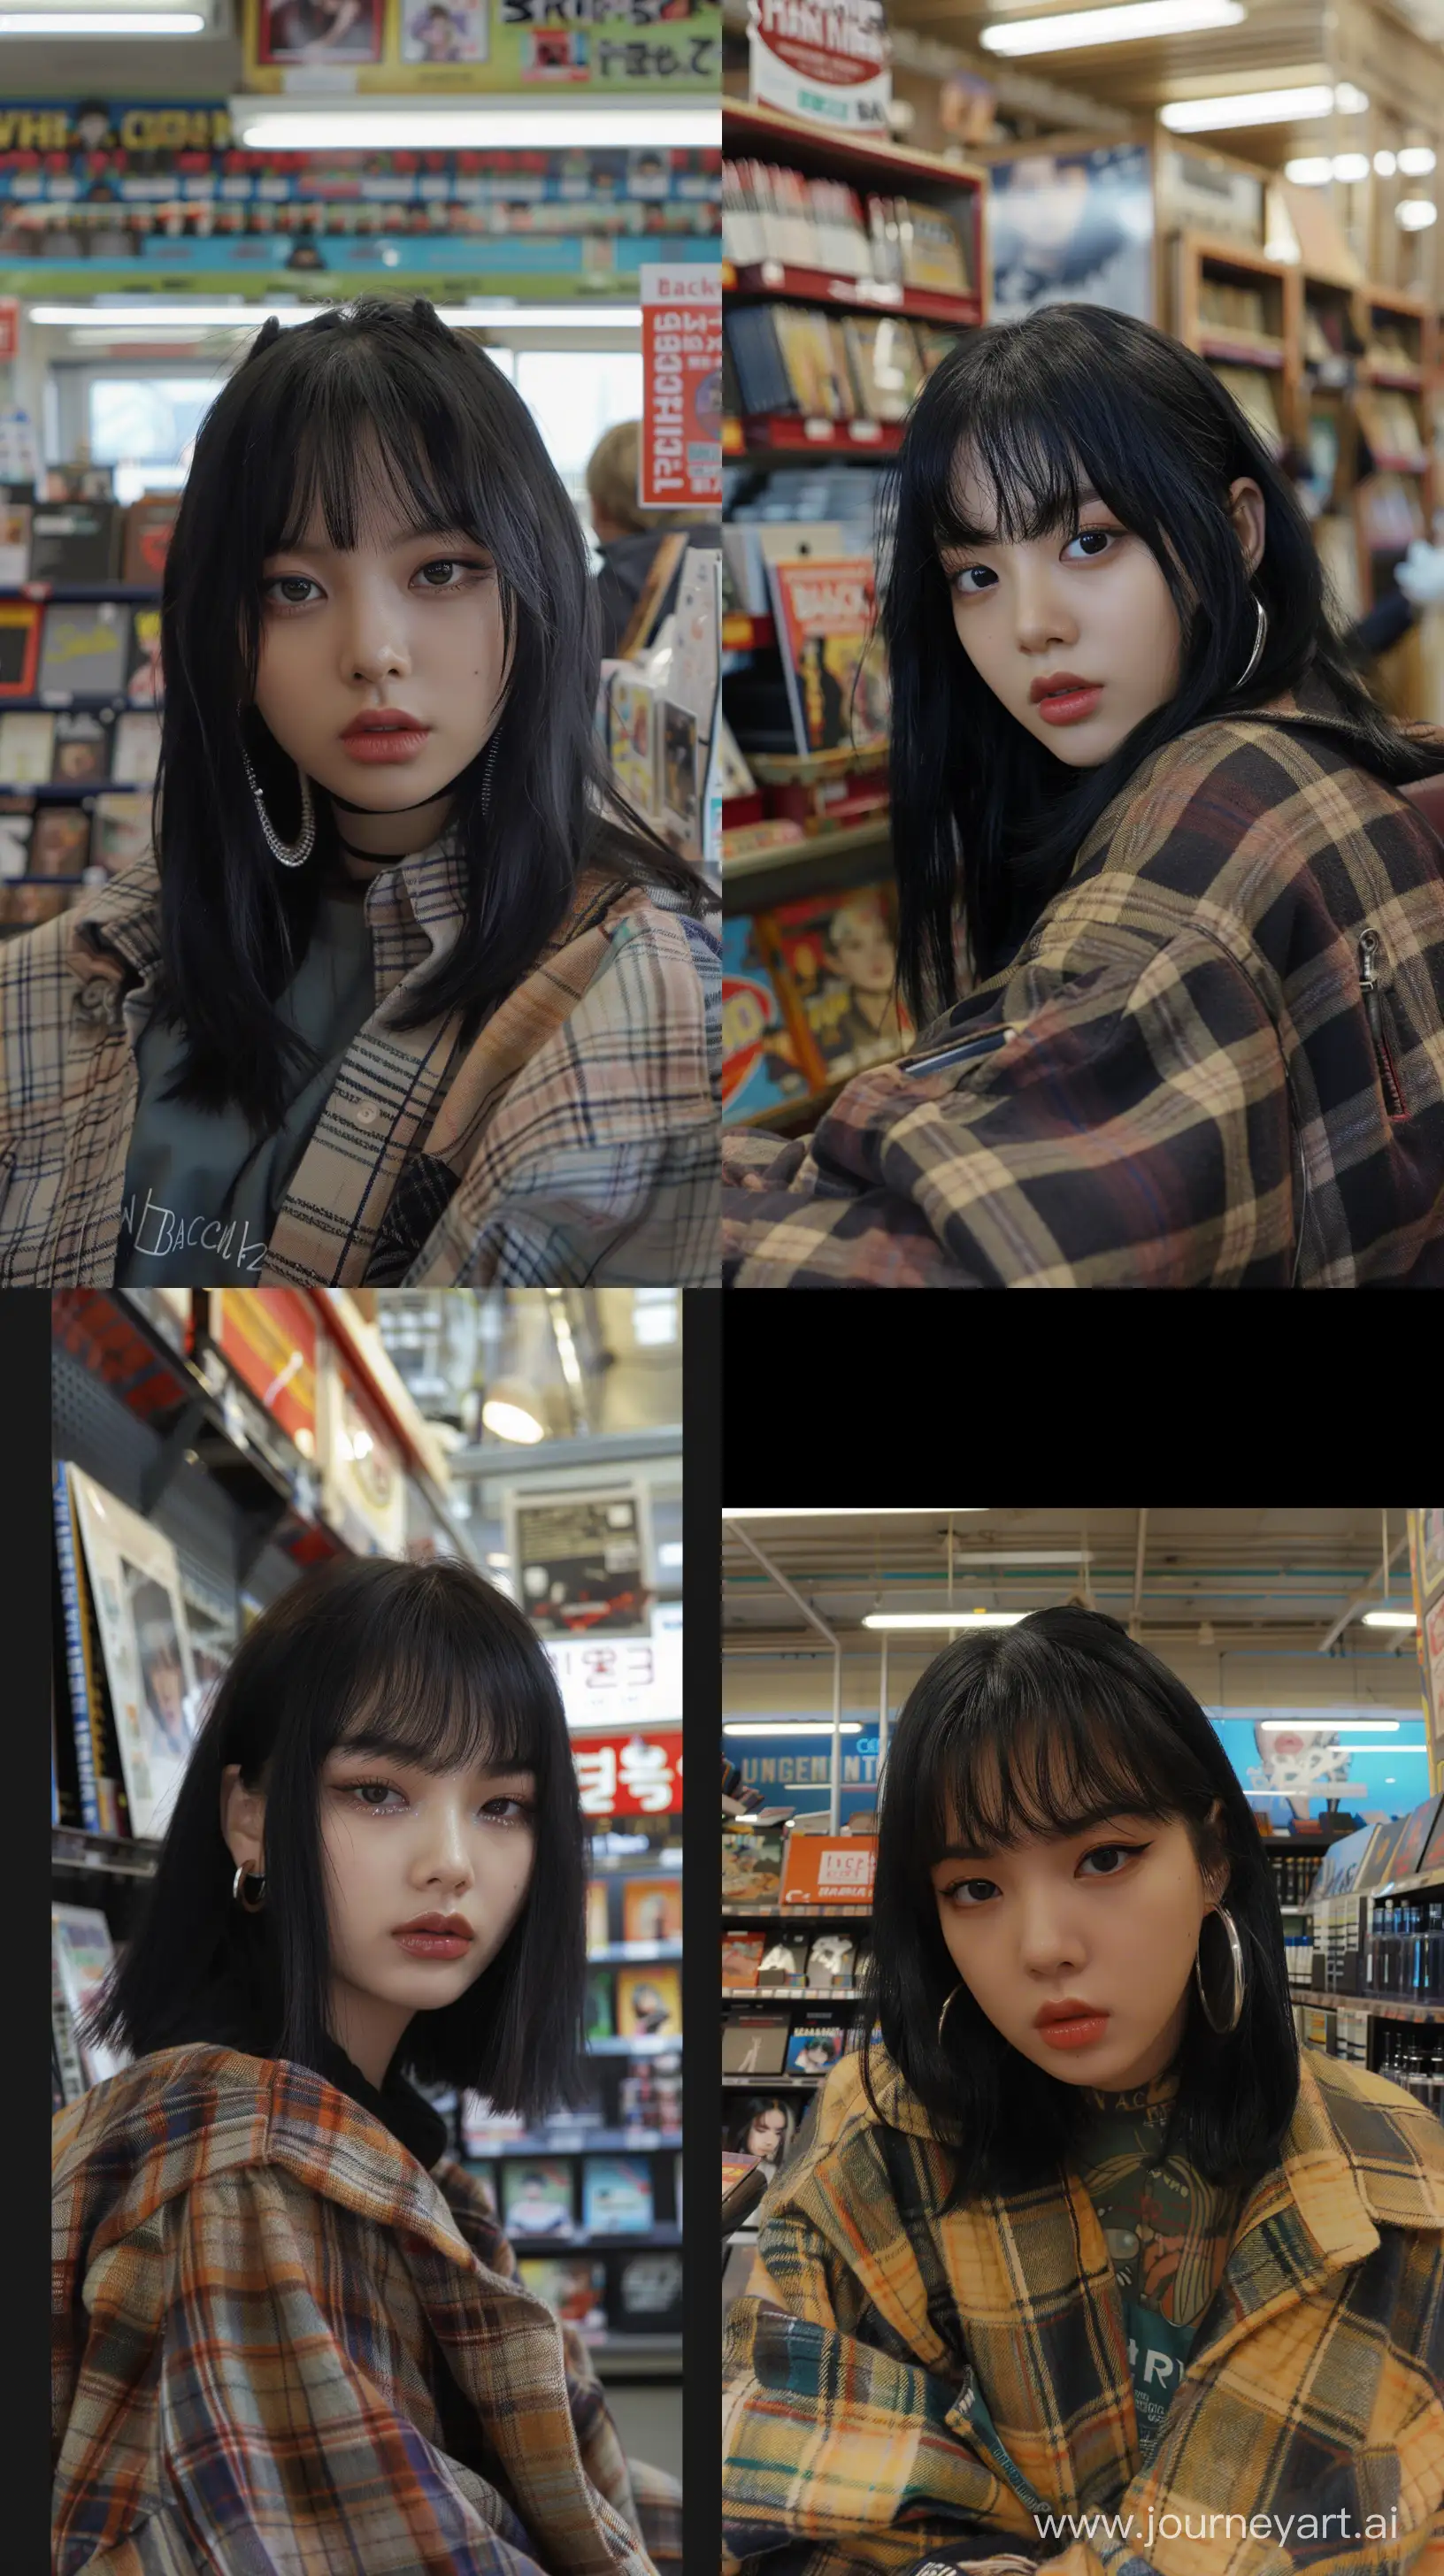 Blackpinks-Jennie-in-Aesthetic-Makeup-and-Oversized-Flannel-at-Album-Store